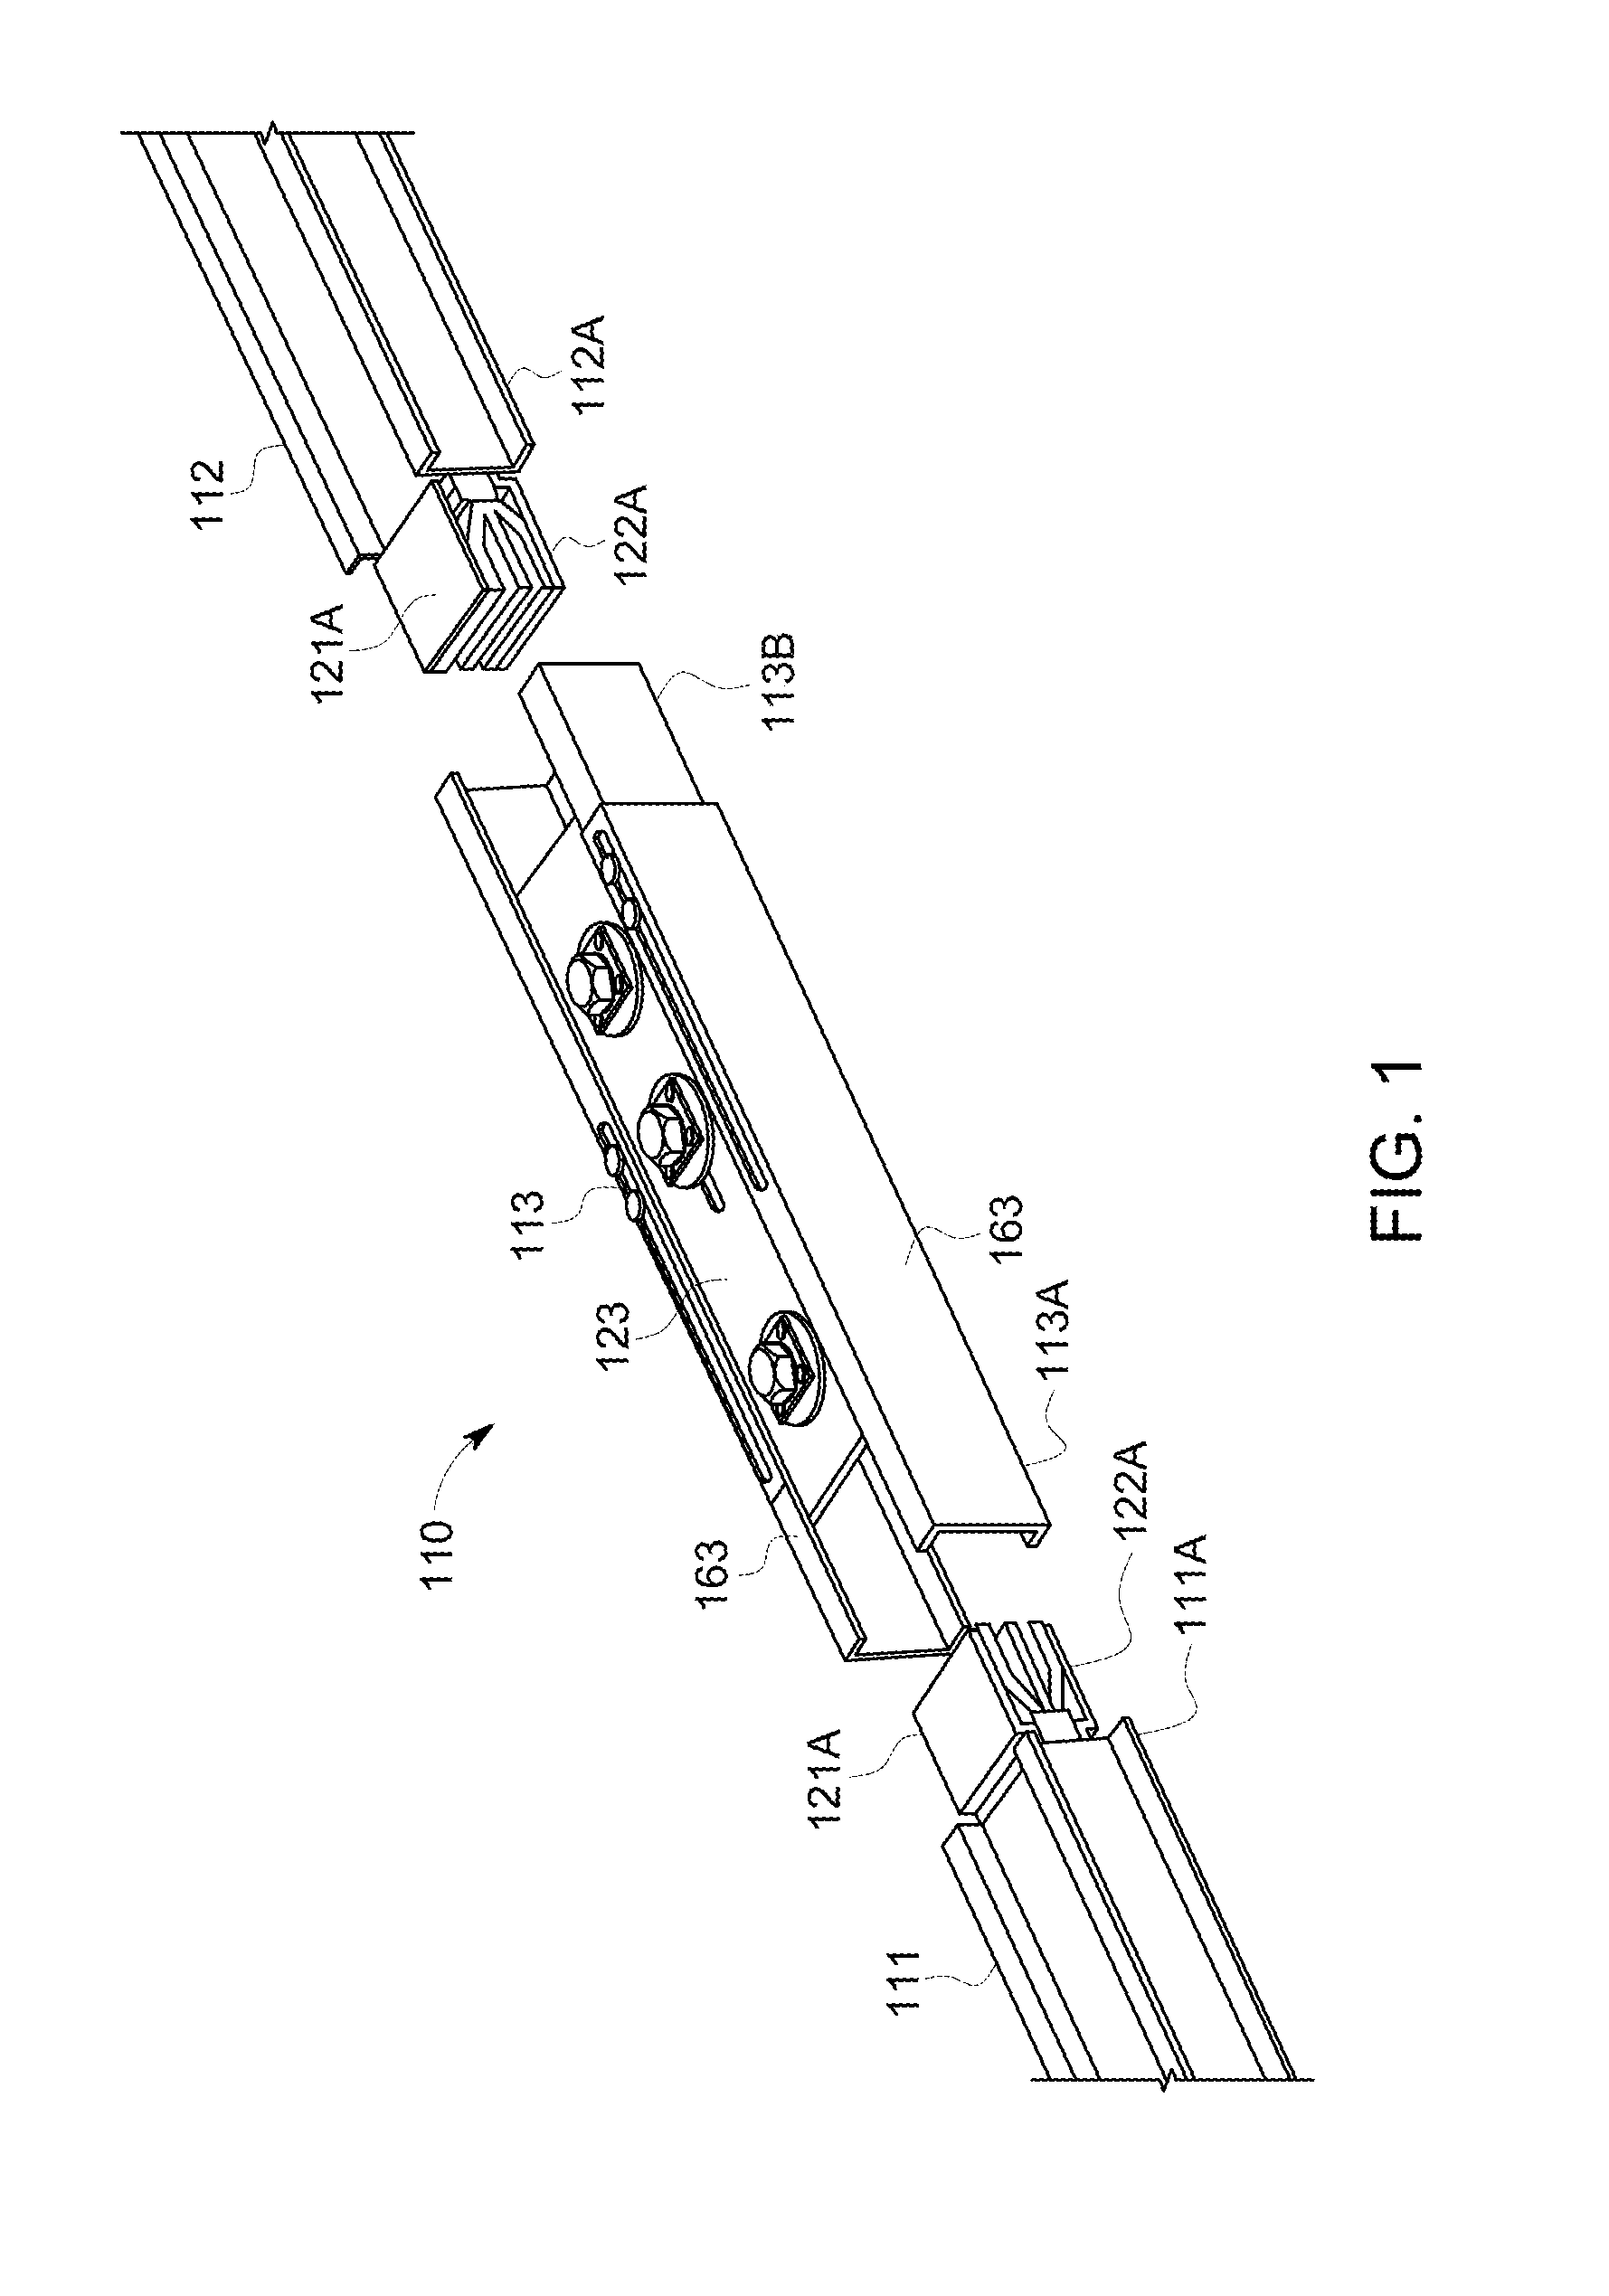 Busway joint coupling having a splice plate with a longitudinal rib